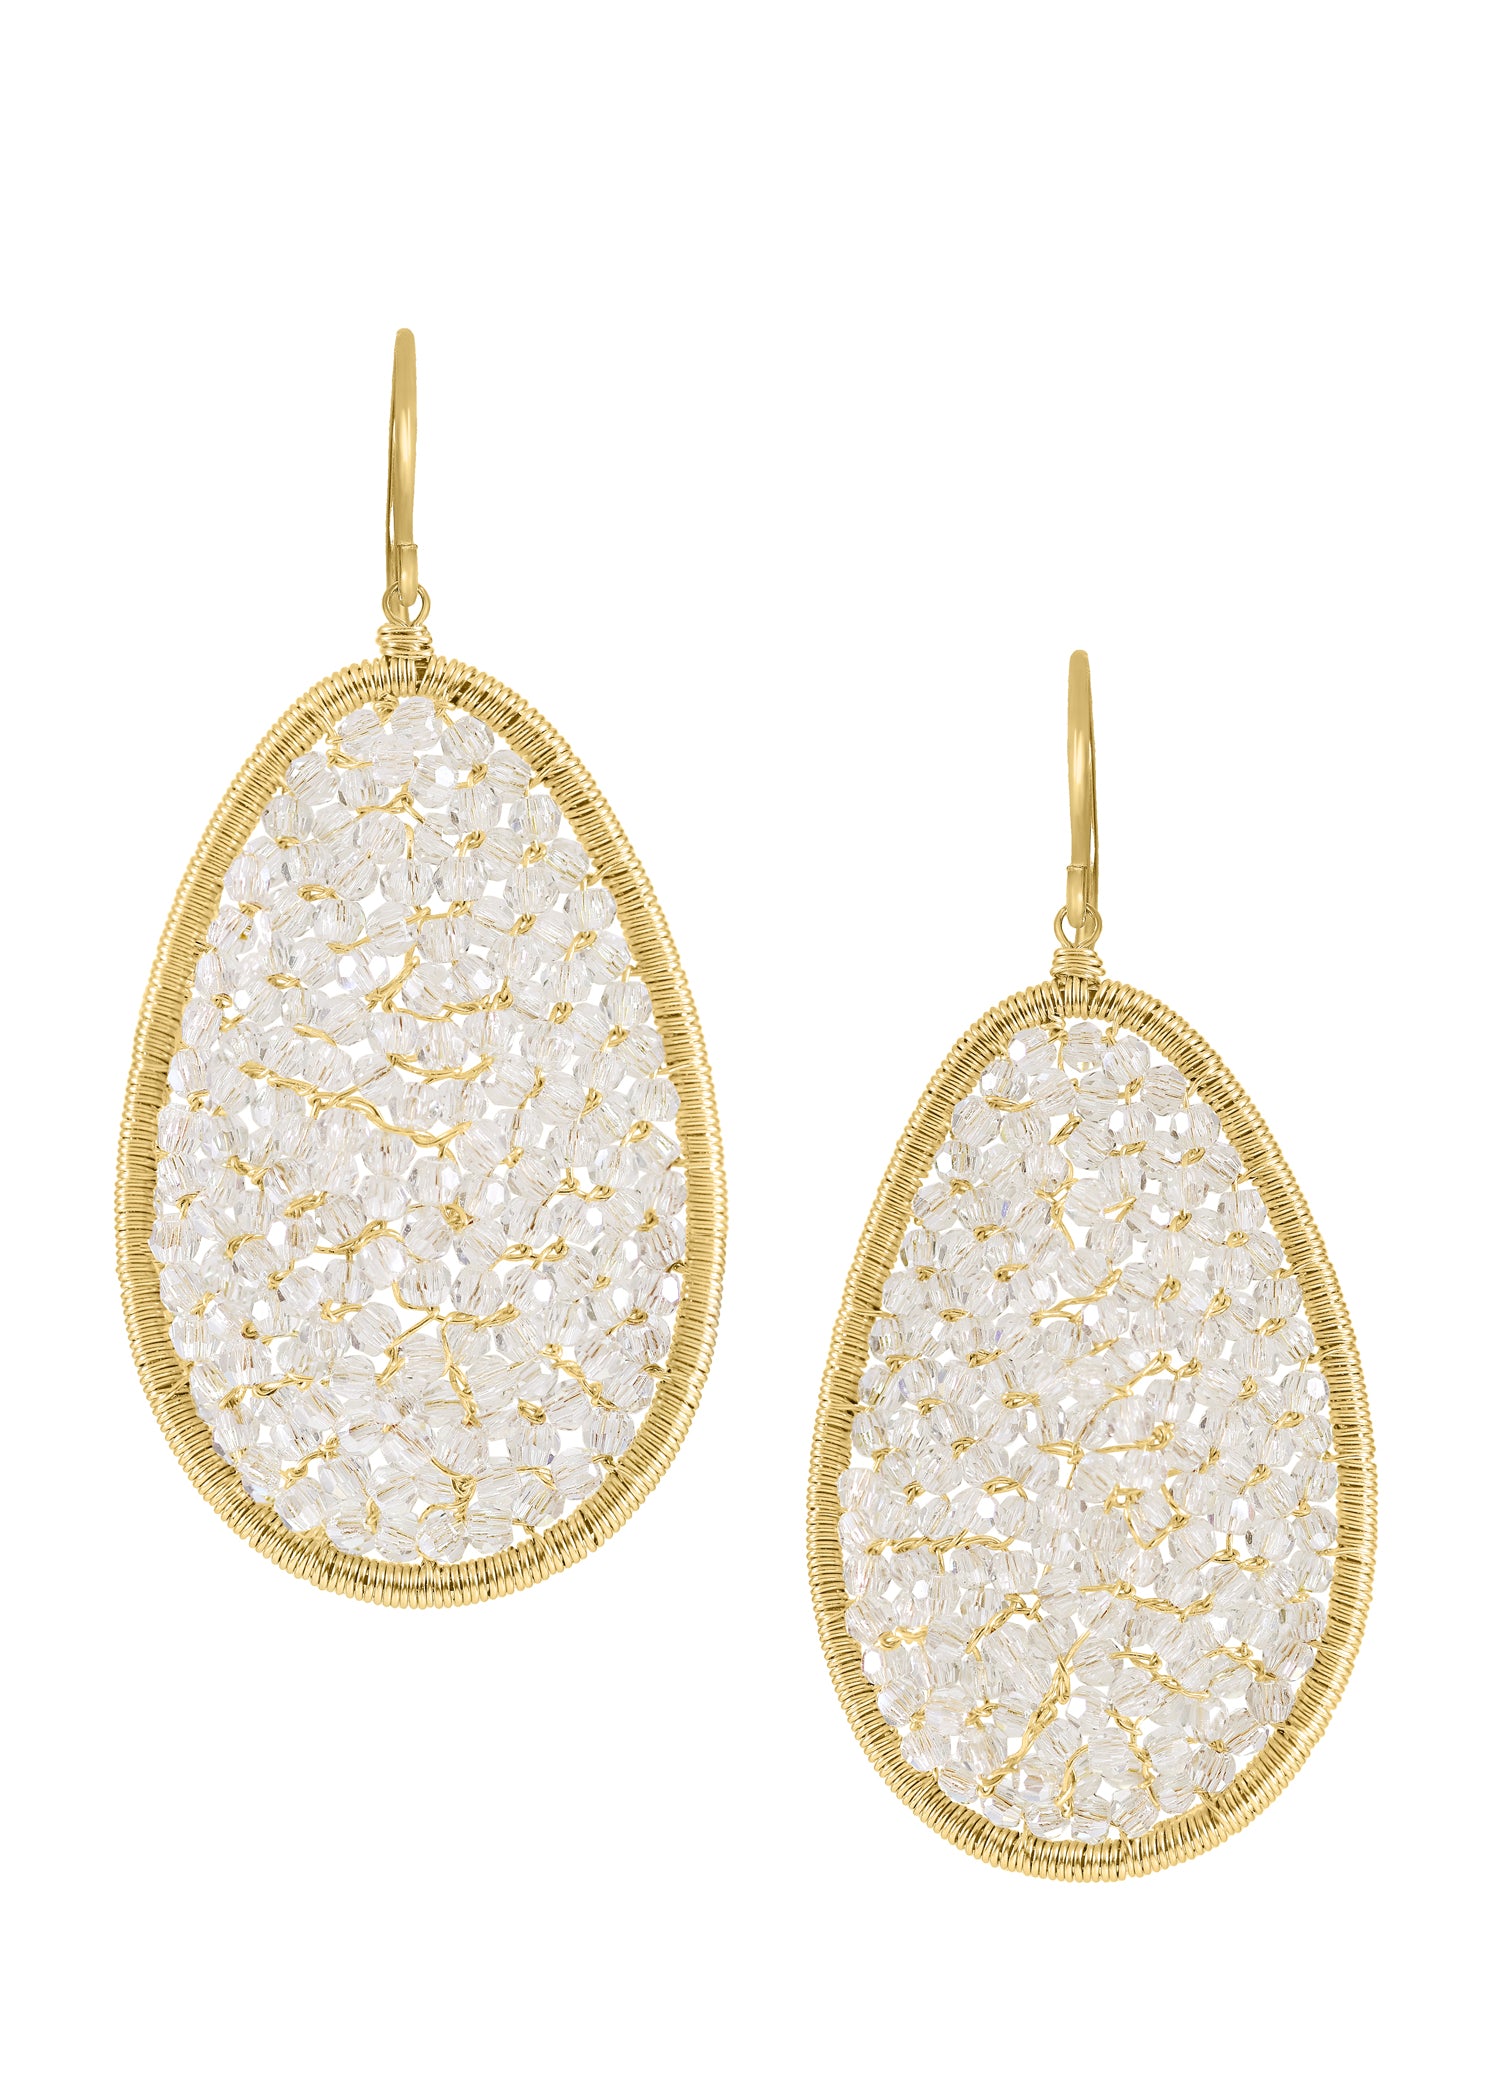 Crystal 14k gold fill Earrings measure 1-3/4" in length (including the ear wires) and 13/16" in width at the widest point Handmade in our Los Angeles studio